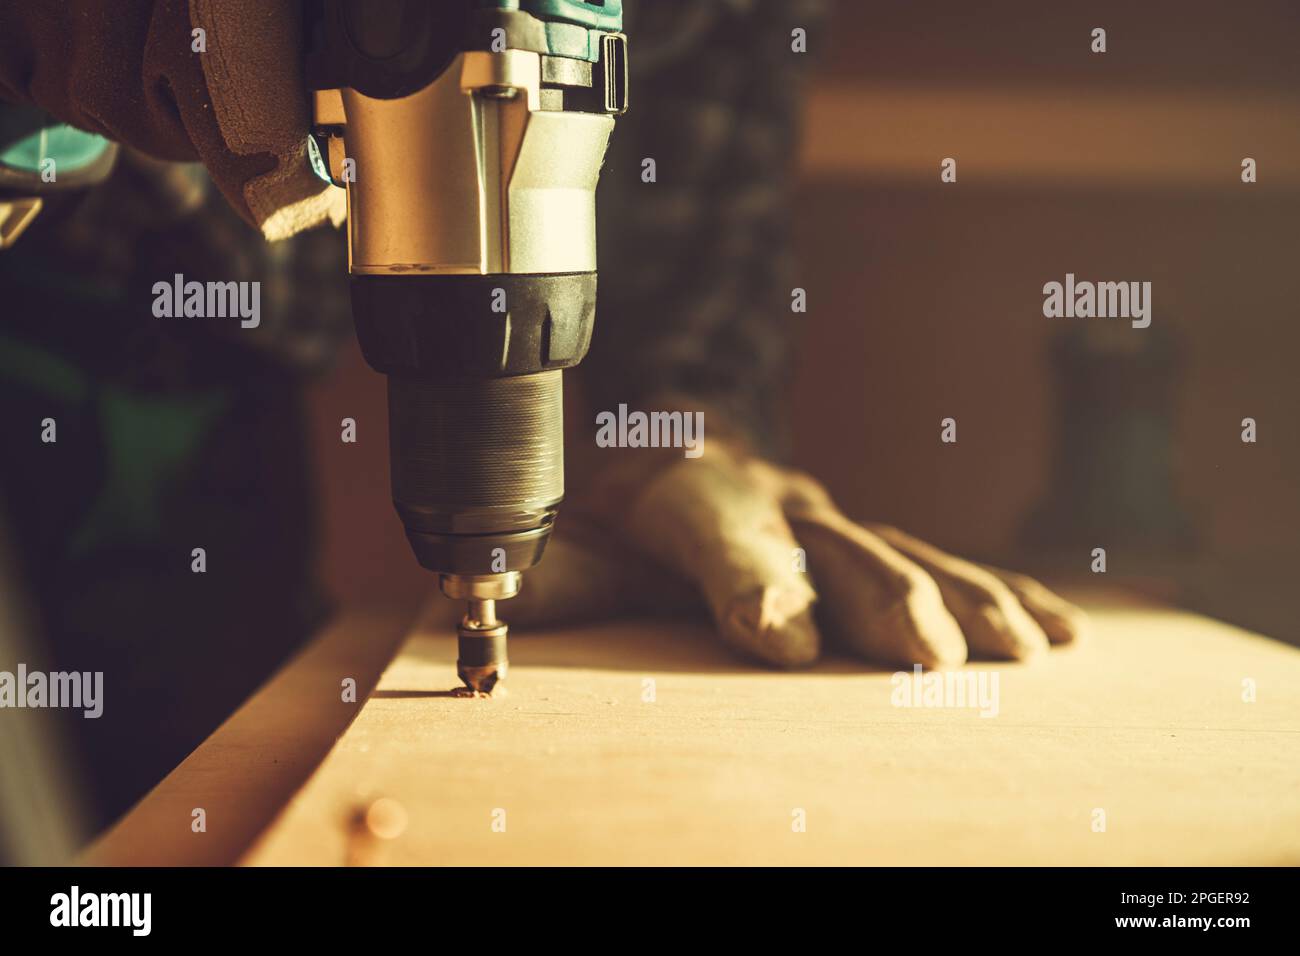 Woodwork Project Theme. Spinning Drill Driver with Wood Boring Bit Attached Close Up. Stock Photo